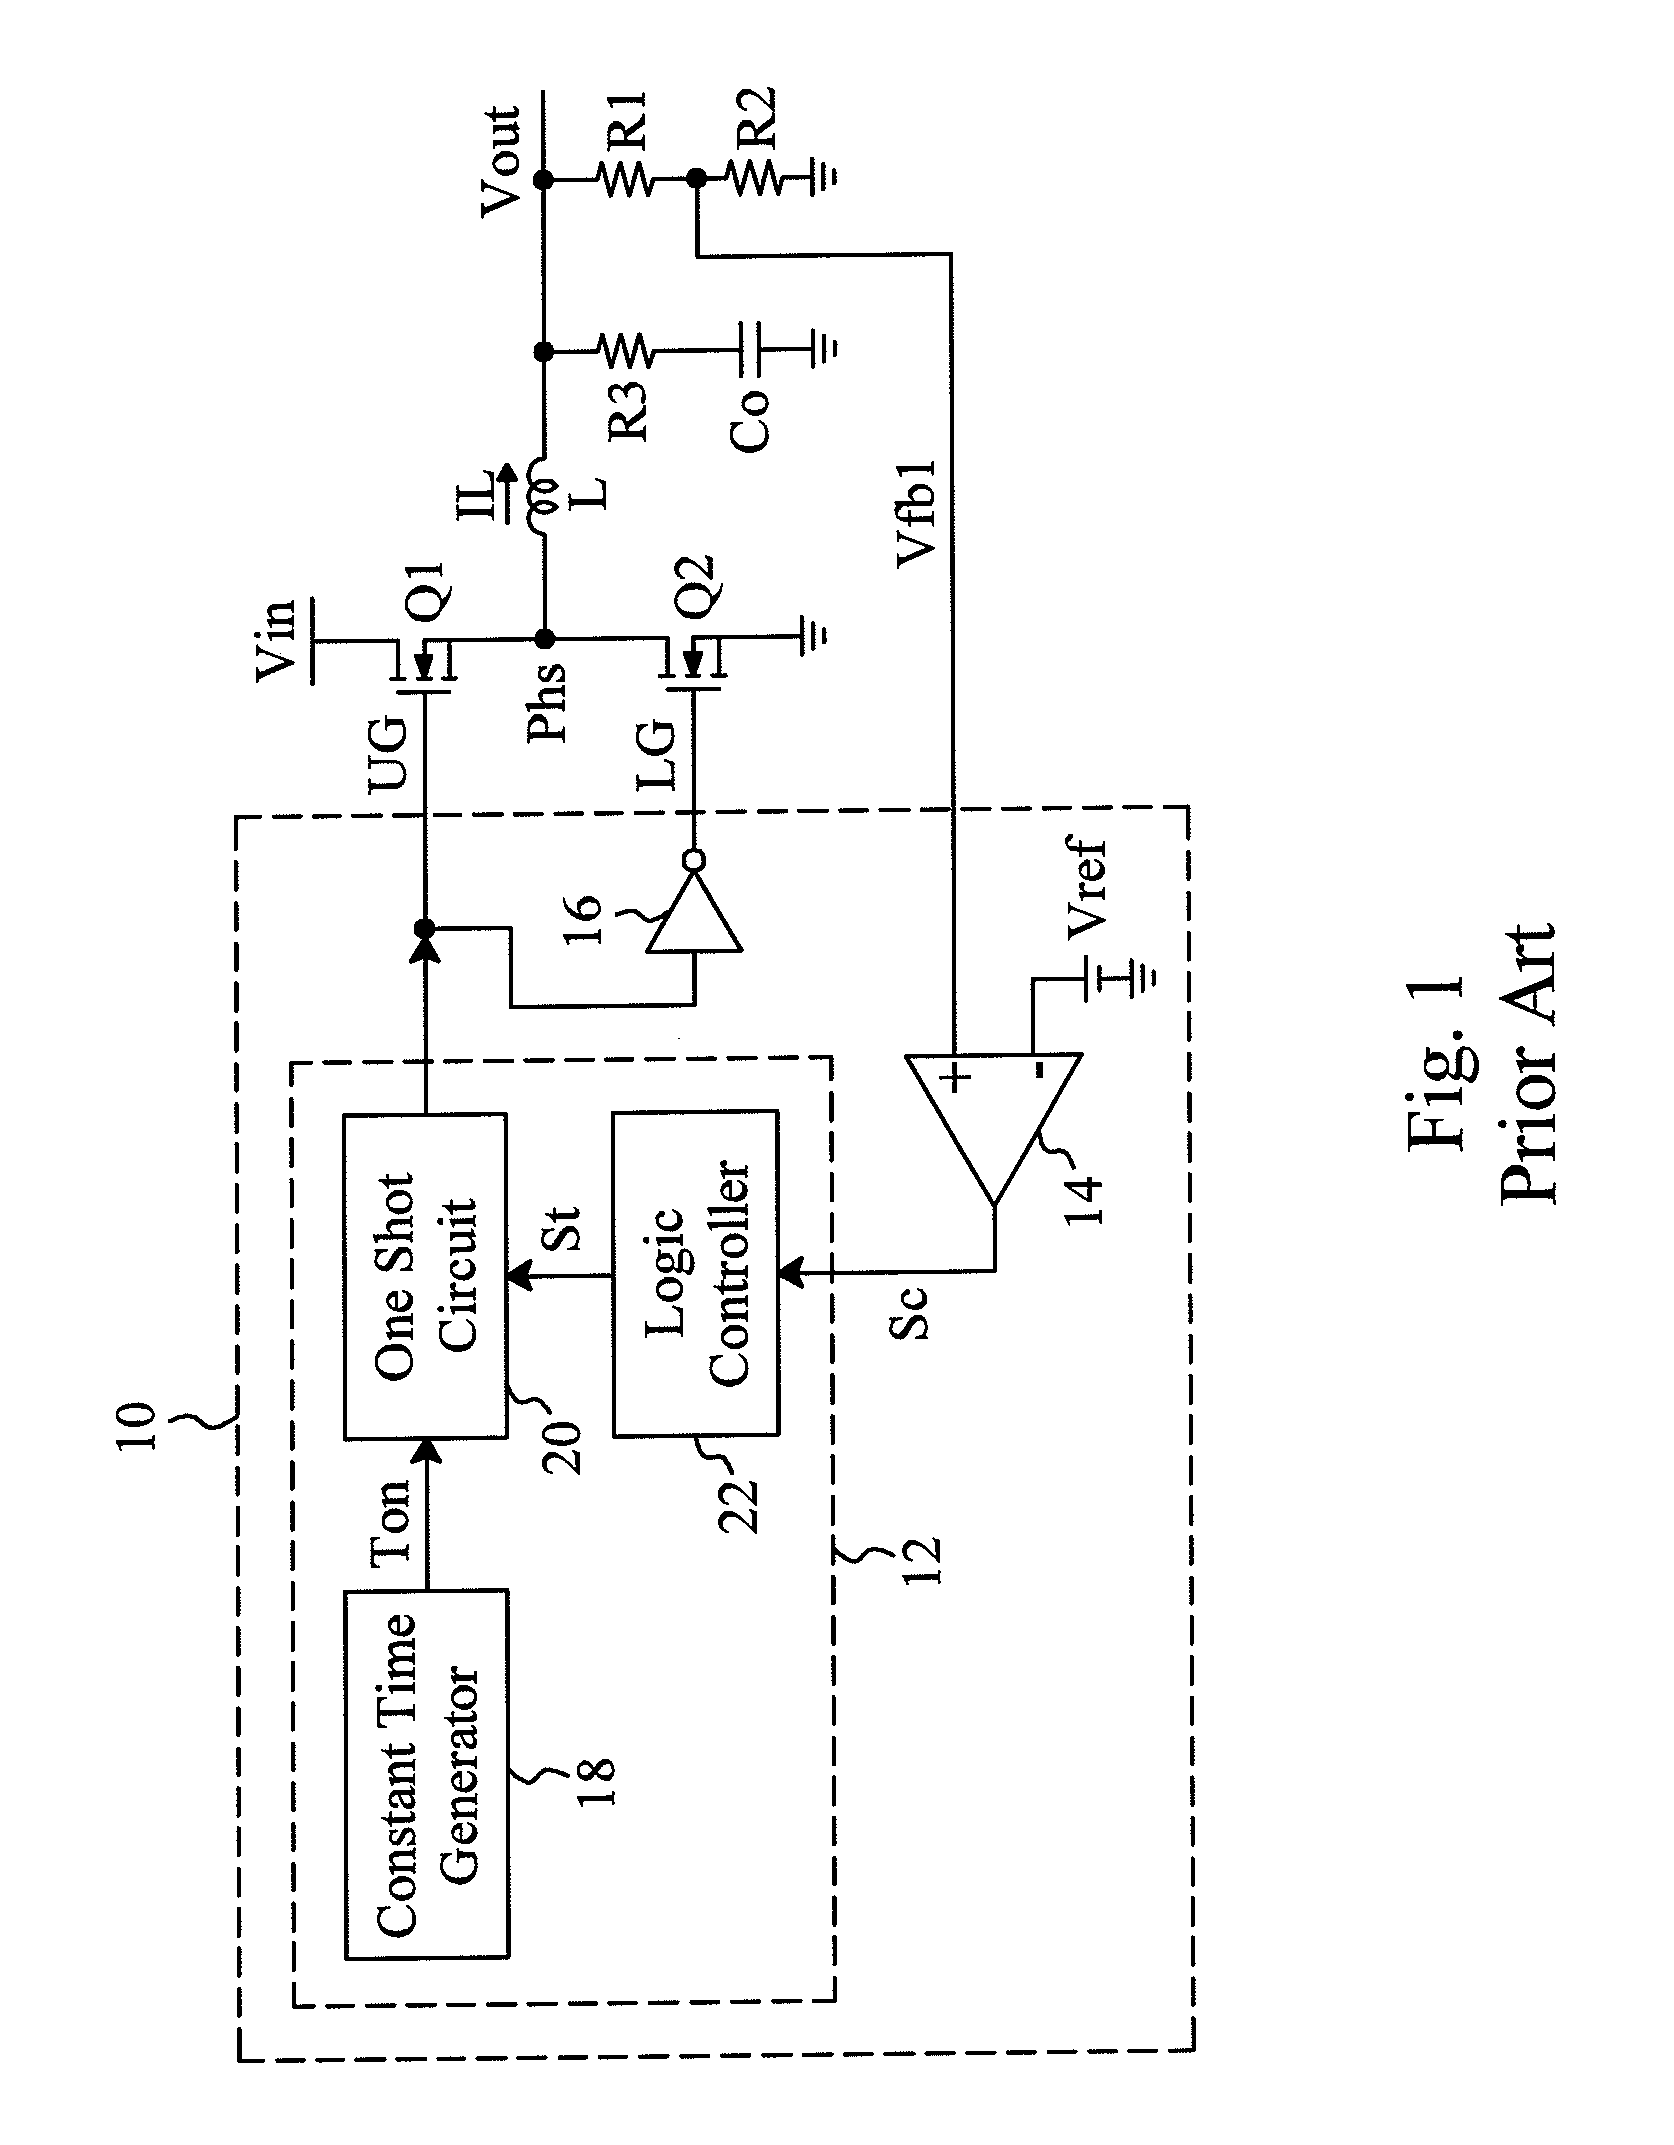 Control circuit and method for a ripple regulator system